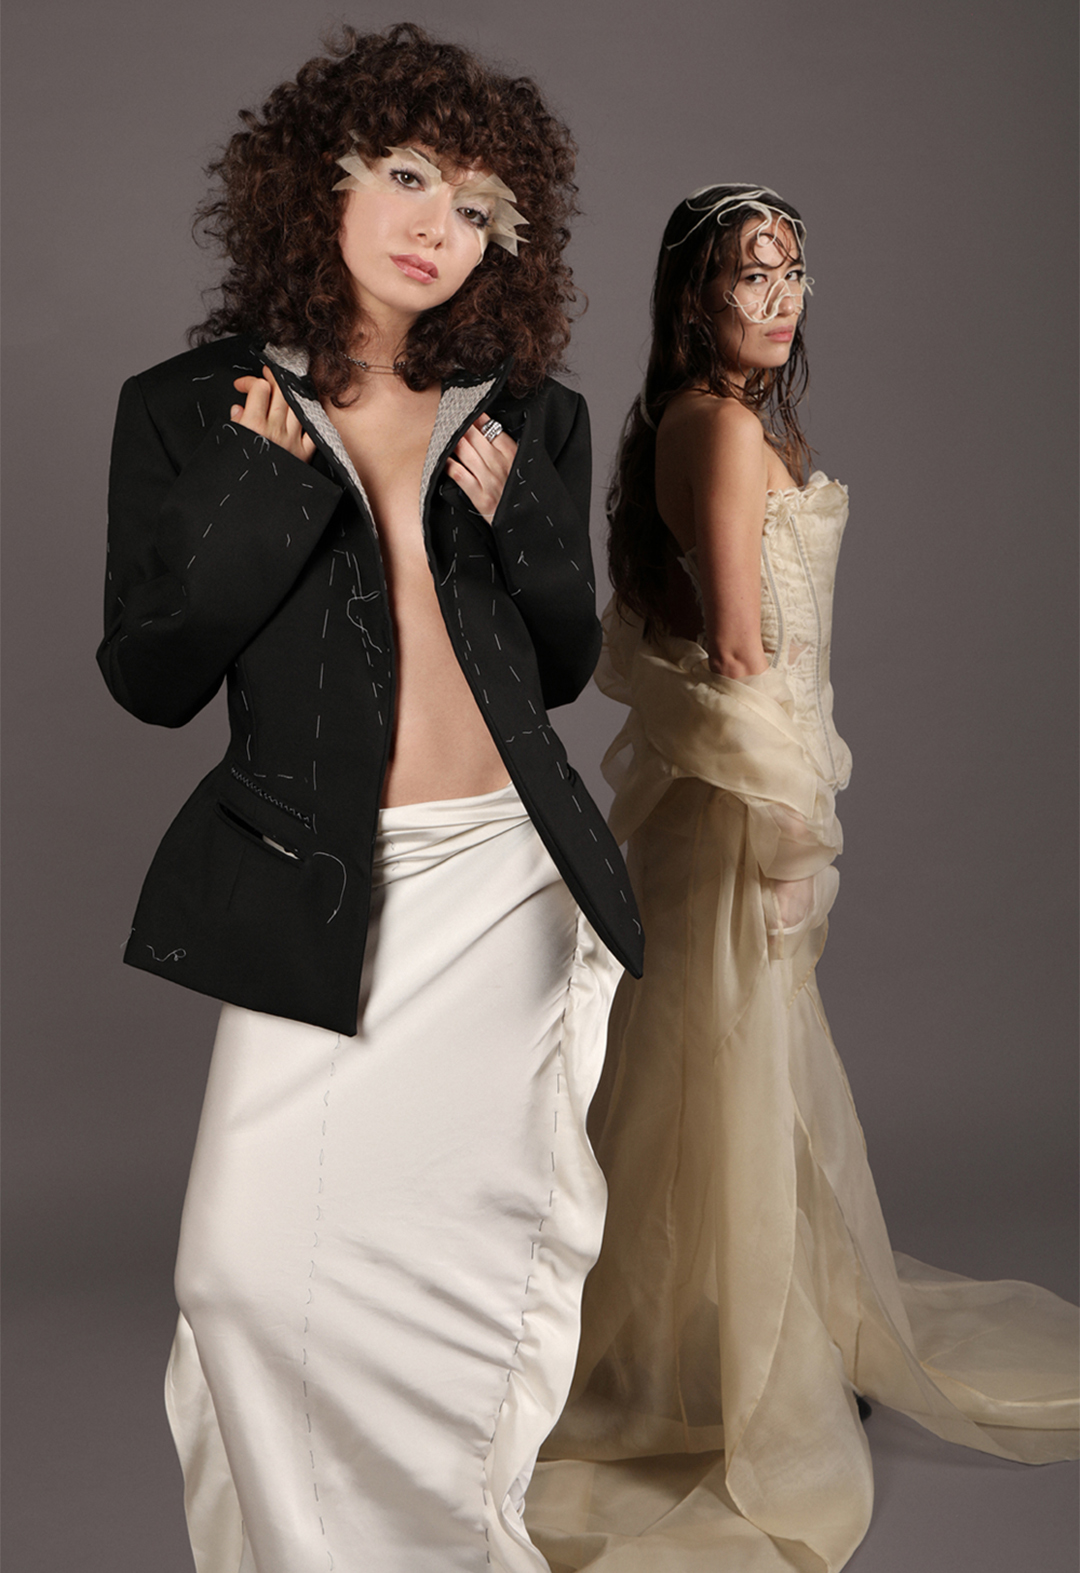 Two models presenting the two looks. The model closest to the camera is wearing a back tailored jacket and a bias-cut ivory skirt. Behind her and farther from the camera is another model wearing a sheer corset top with a sheer draped skirt/jacket.